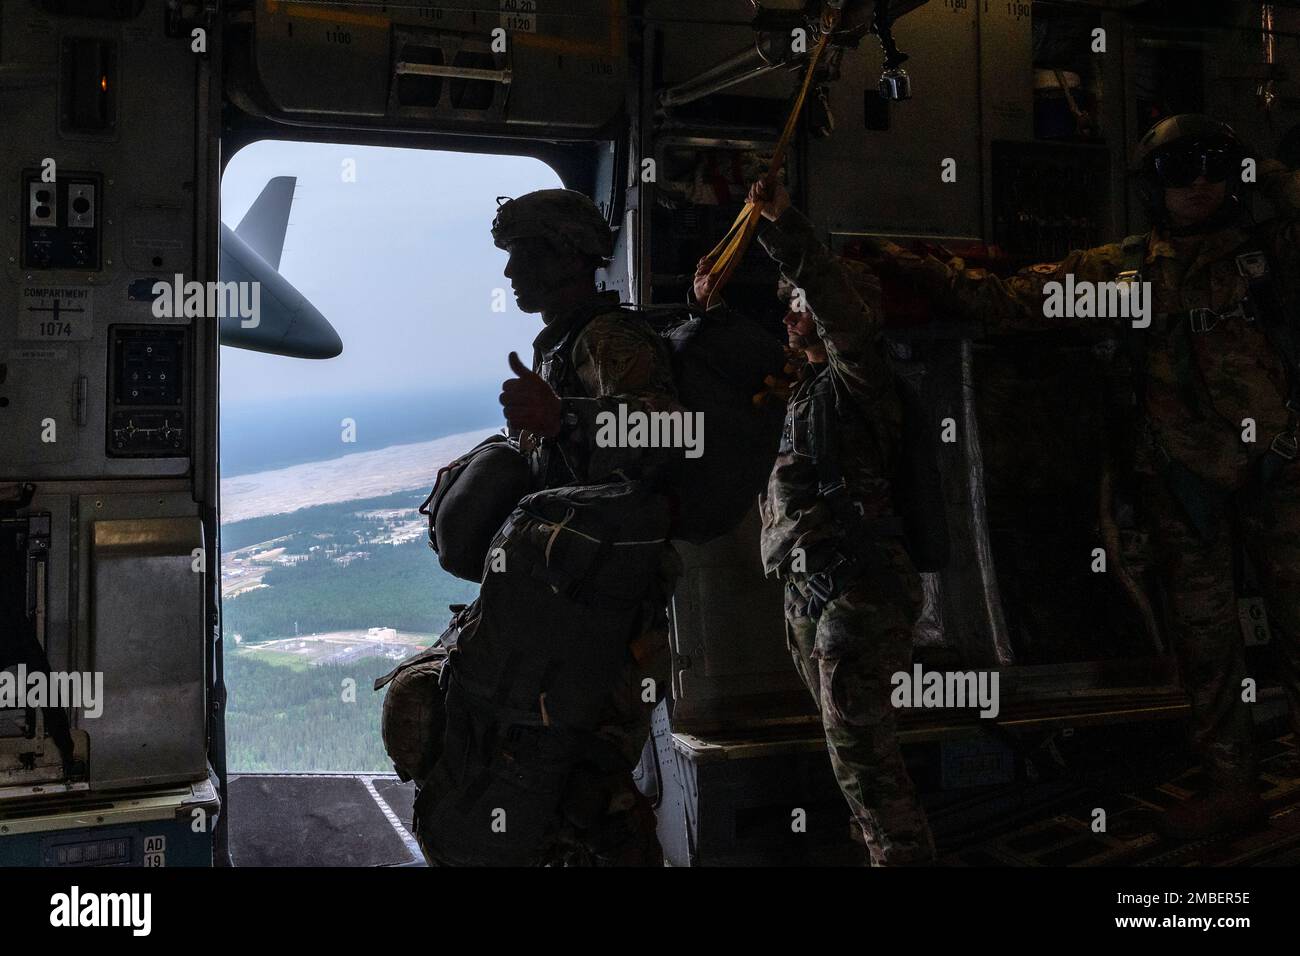 U.S. Army Sgt. 1st Class Charlie Arrendale, gives a thumbs-up signal prior to the paratroopers jumping out of a C-17 Globemaster III from the 517th Airlift Squadron, Joint Base Elmendorf-Richardson, Alaska over Allen Army Airfield, Fort Greely, June 15, 2022. RF-A provides realistic combat training by integrating joint, coalition and multilateral forces into simulated forward operating bases. The paratroopers and Arrendale are assigned to the 2nd Infantry Brigade Combat Team (Airborne), 11th Airborne Division. Stock Photo